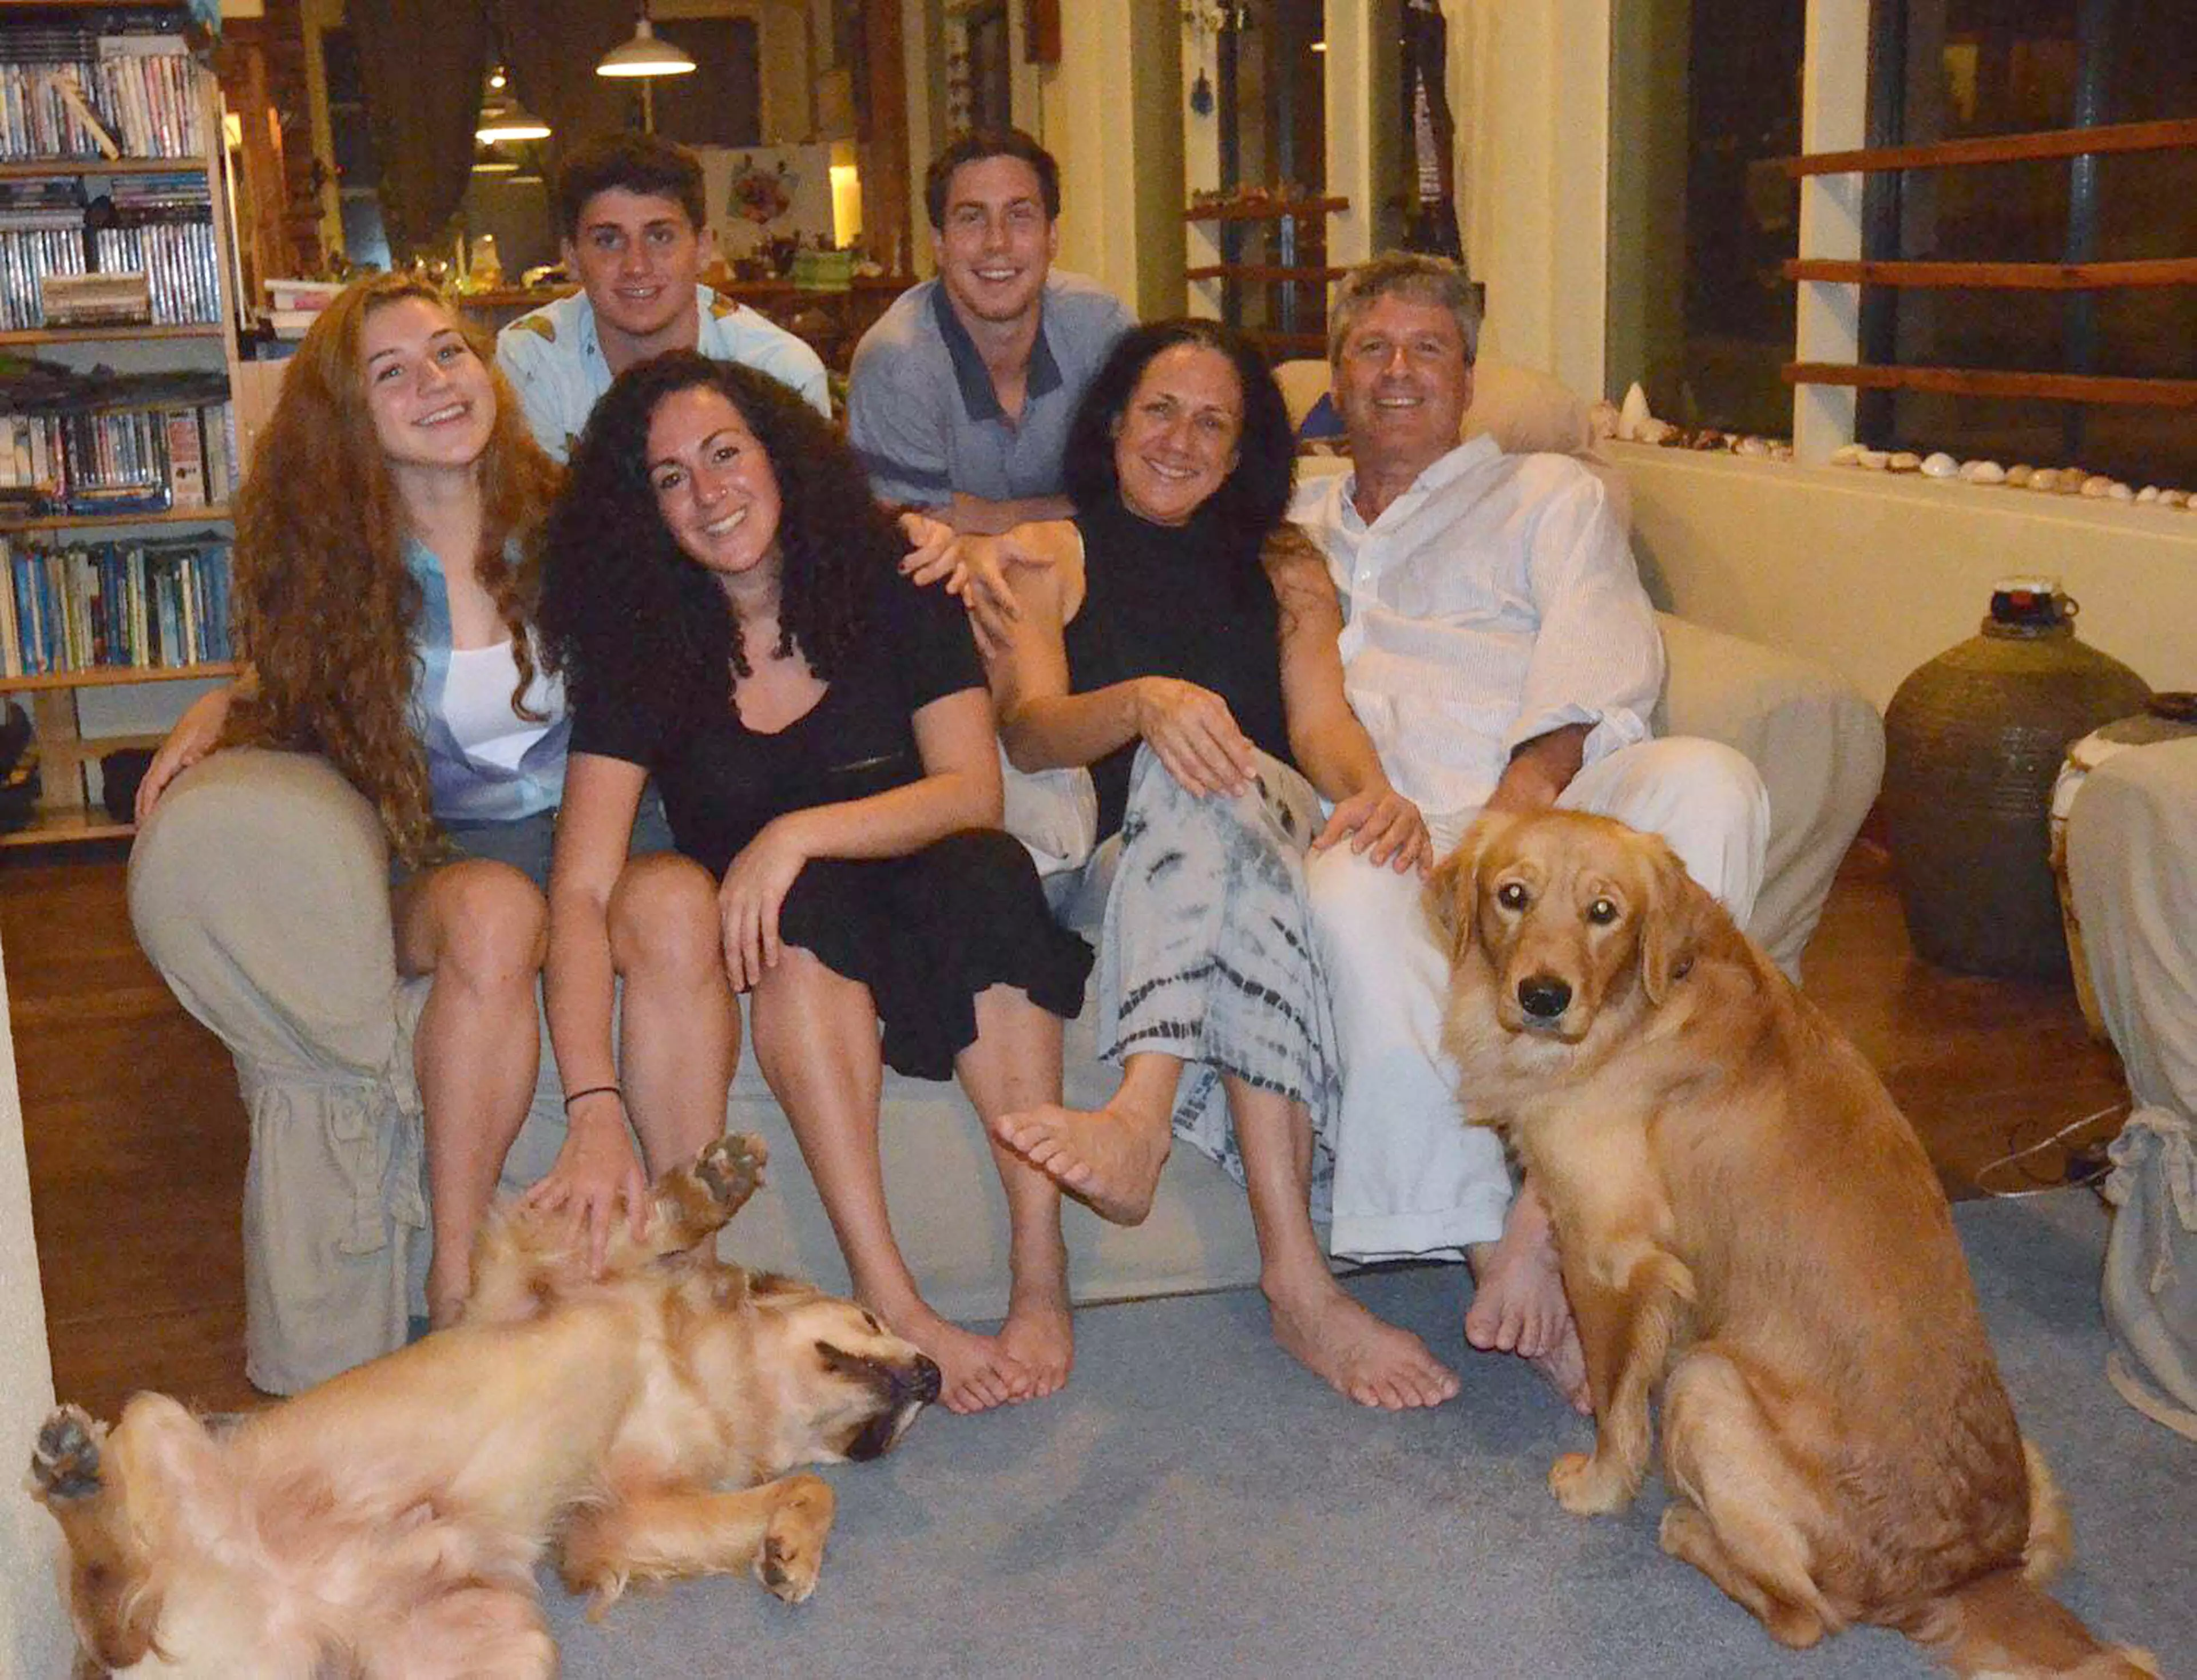 Pictured: Left to right - Gayle, Liam, Yarden, Chad, Tova and Navot with dogs Finn and Nemo.